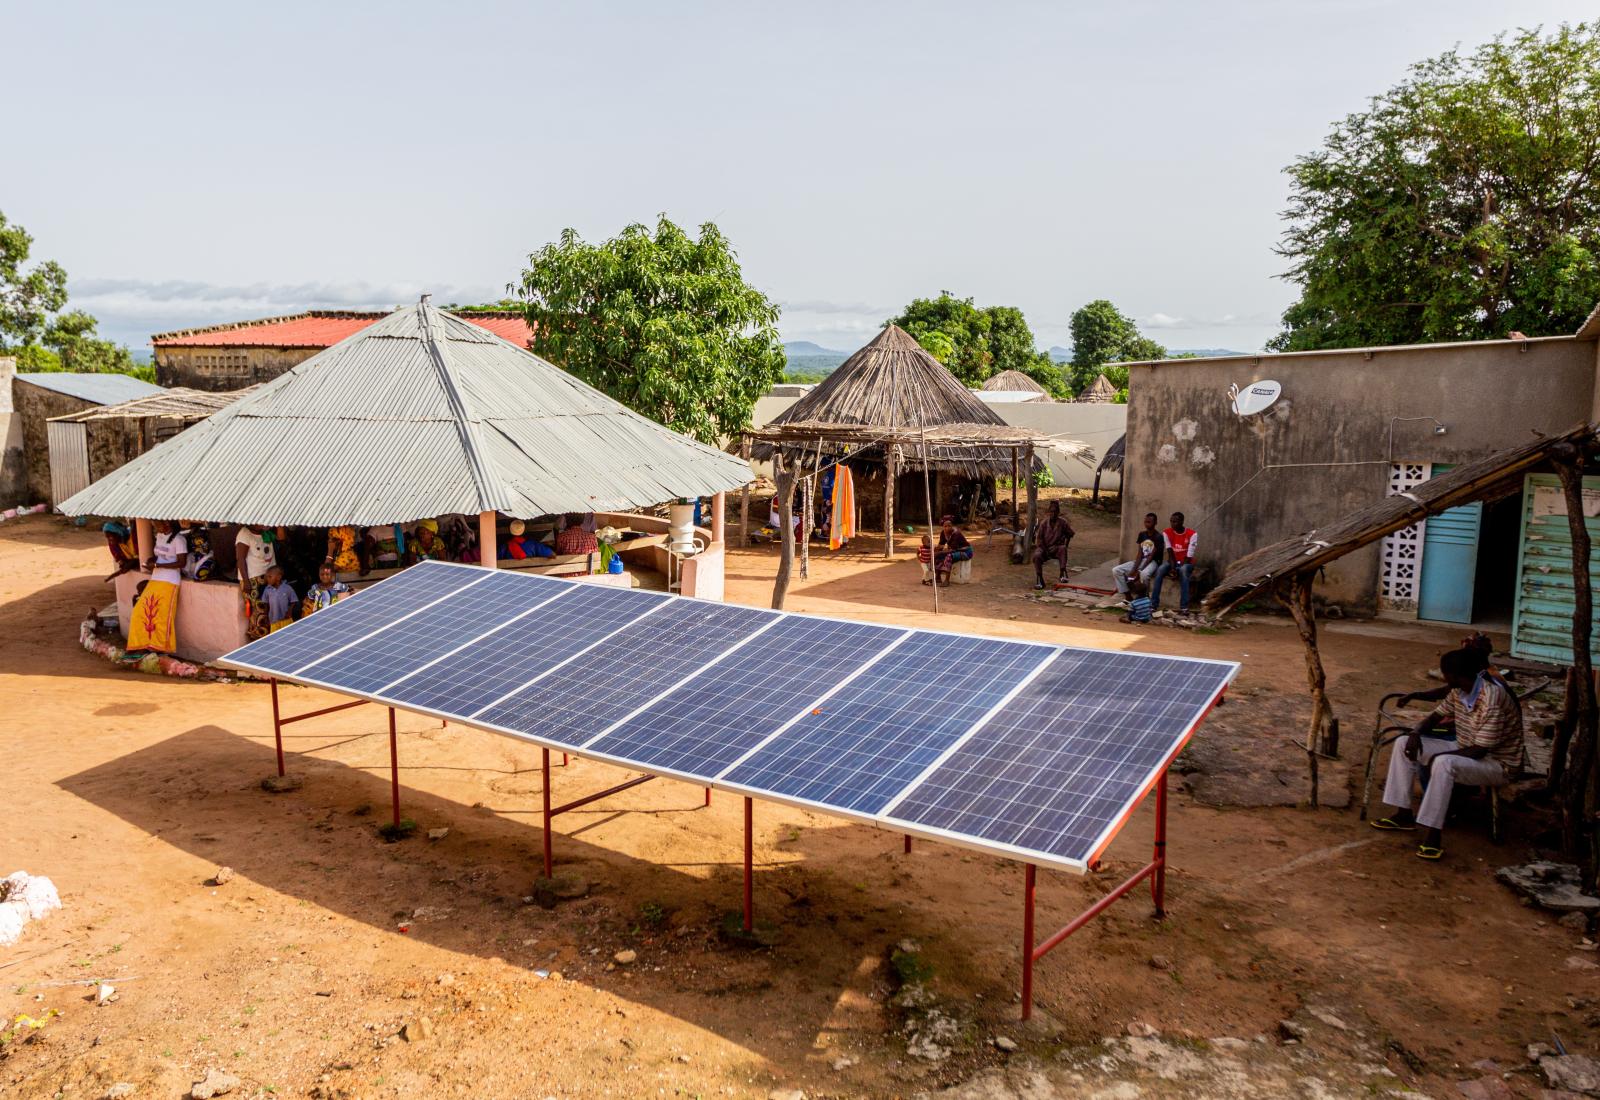 Solar panels in the health care center of Dindefelo, a remote village in Senegal where more than 10,000 people live without electricity or drinking water.